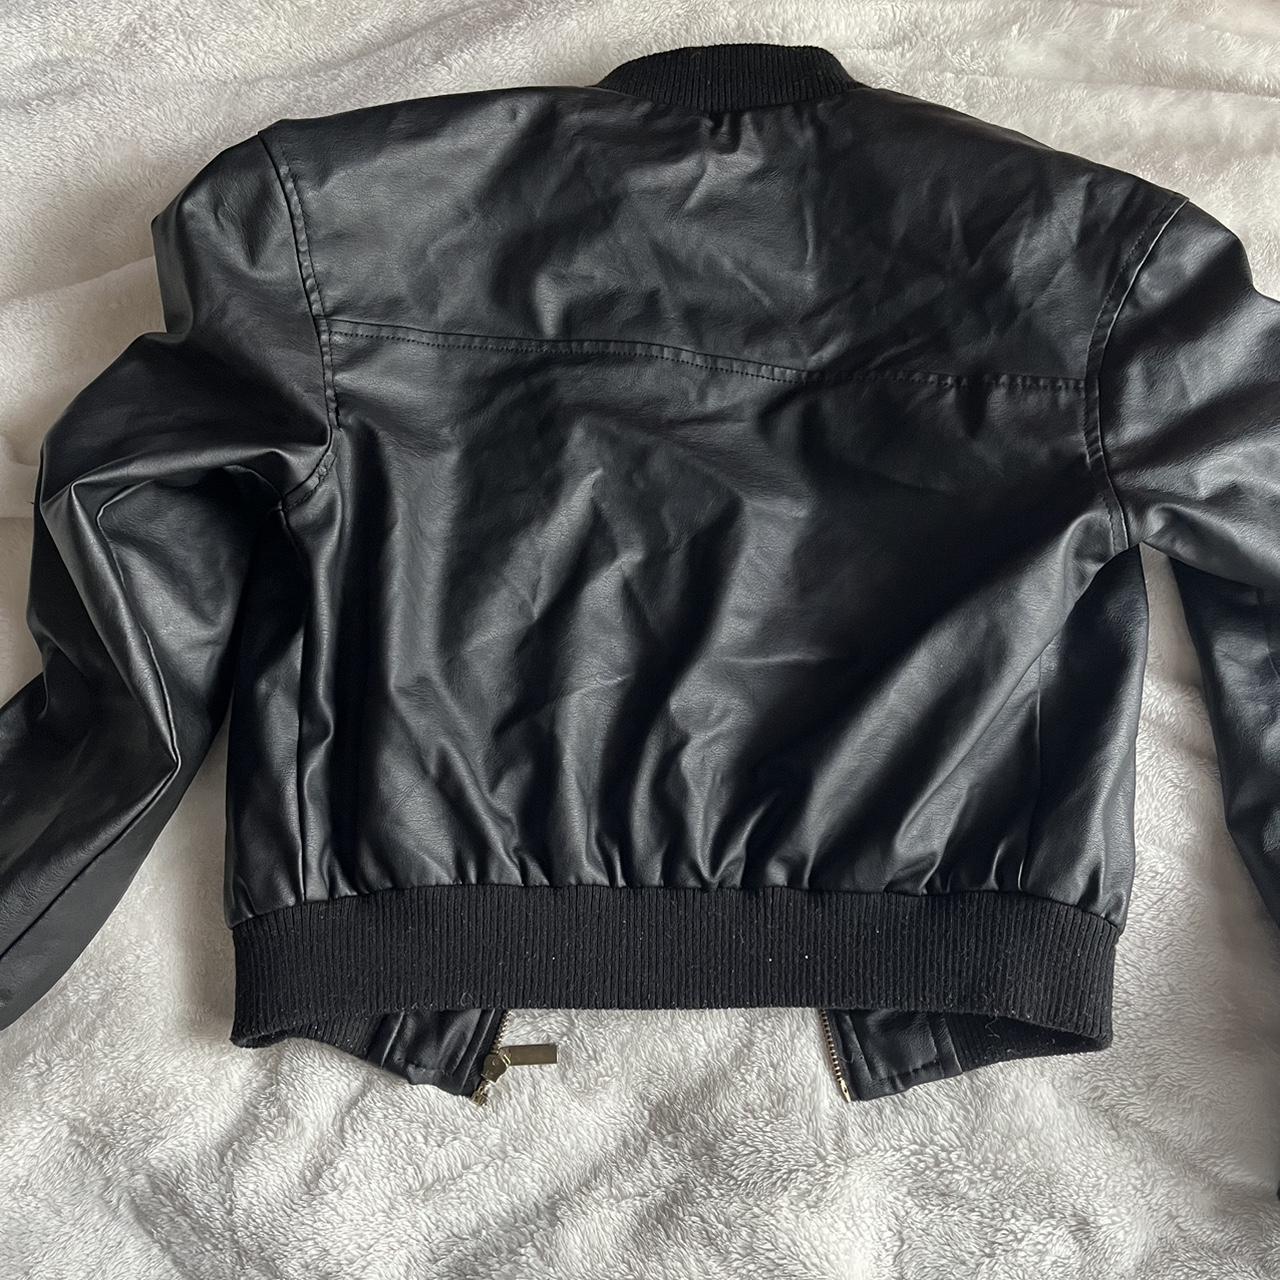 Cropped Leather Jacket from New Look Open to offers... - Depop